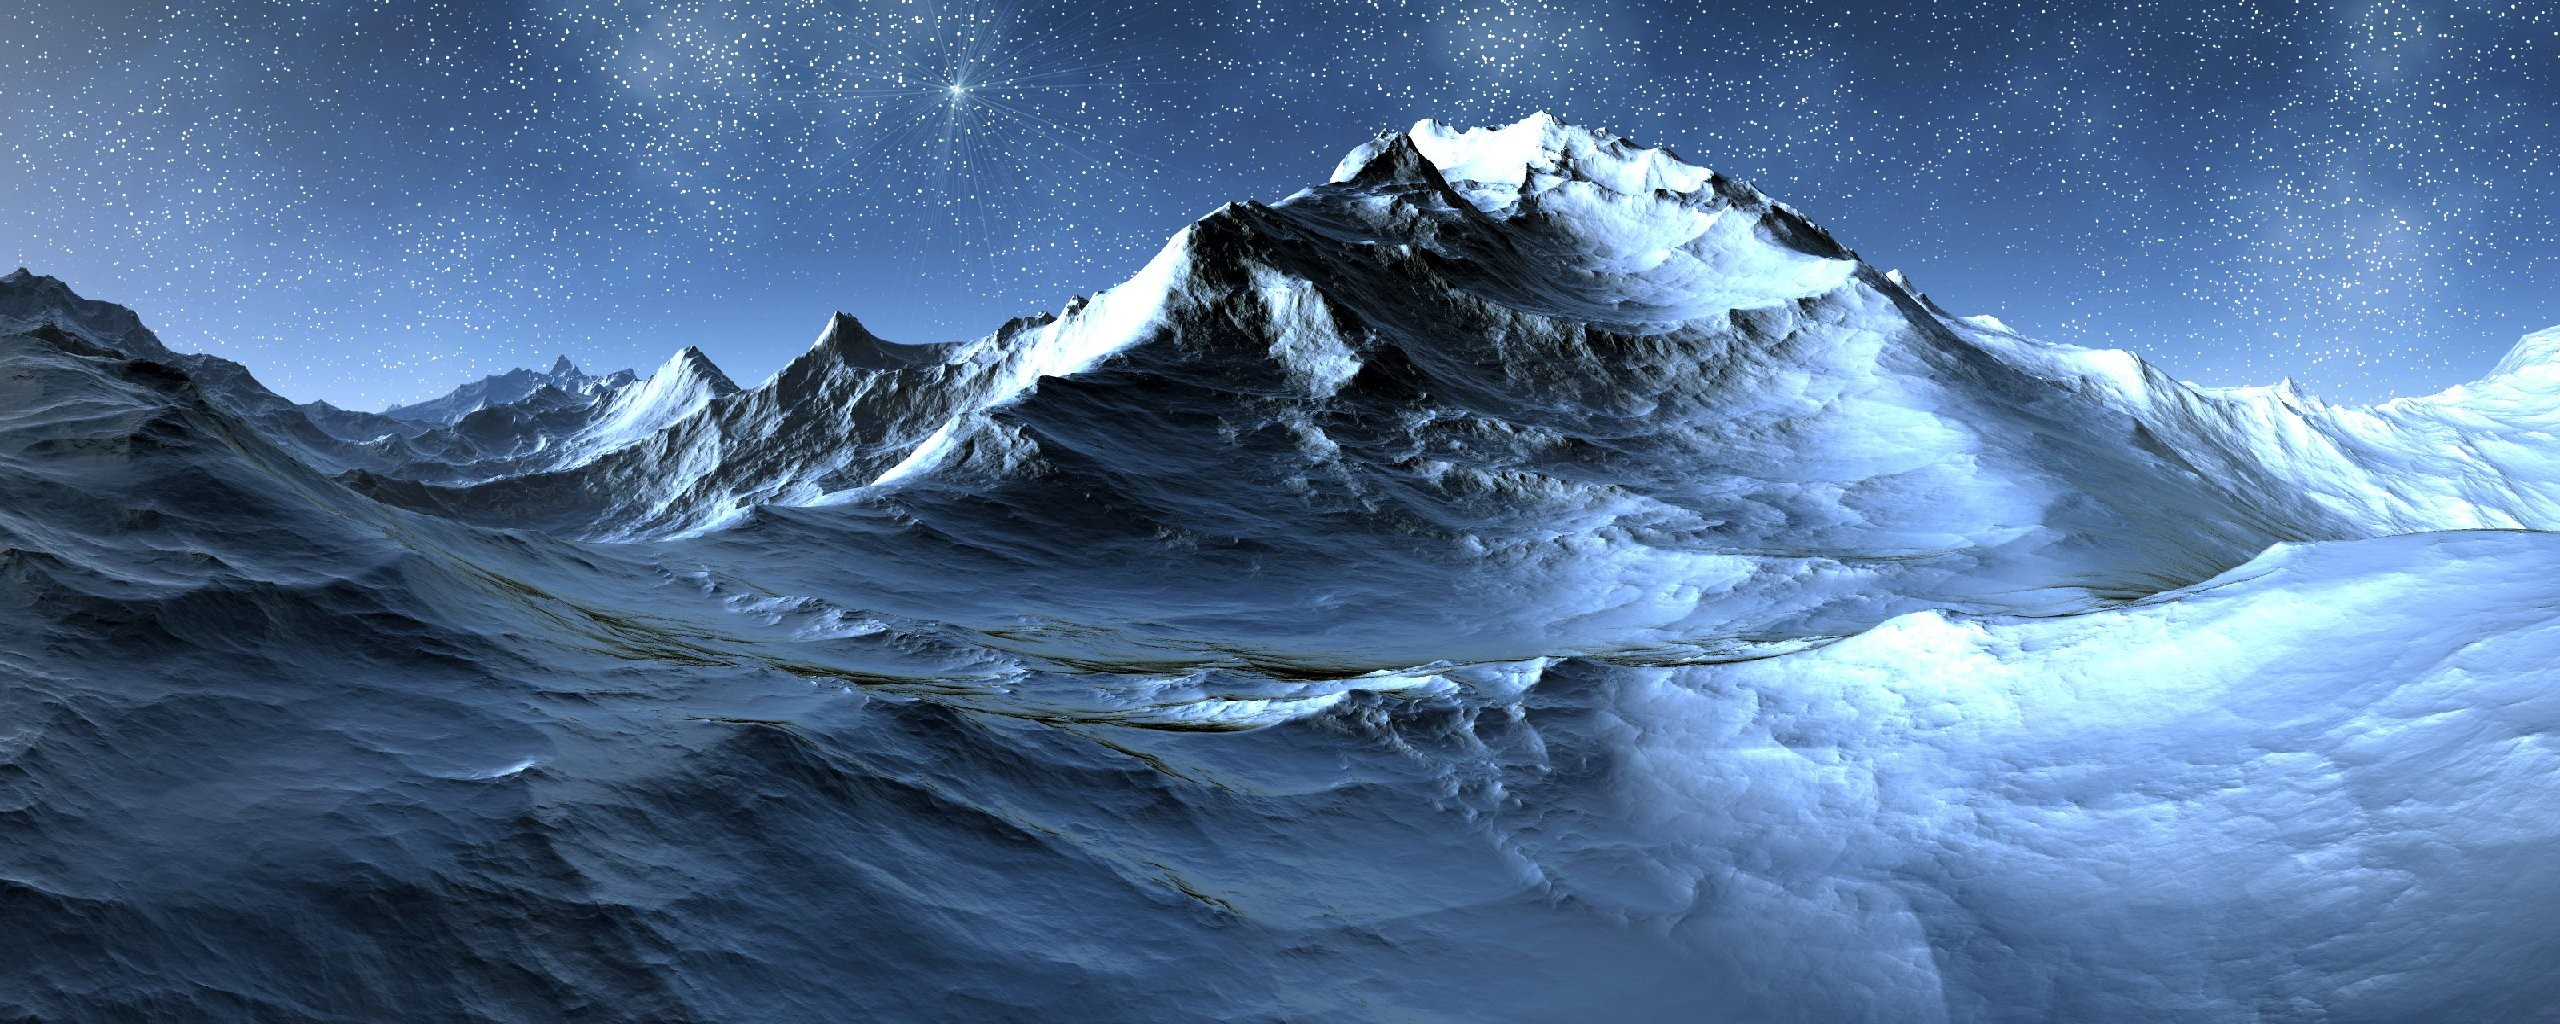 General 2560x1024 artwork stars mountains snowy peak snow ice cold nature outdoors landscape multiple display dual monitors